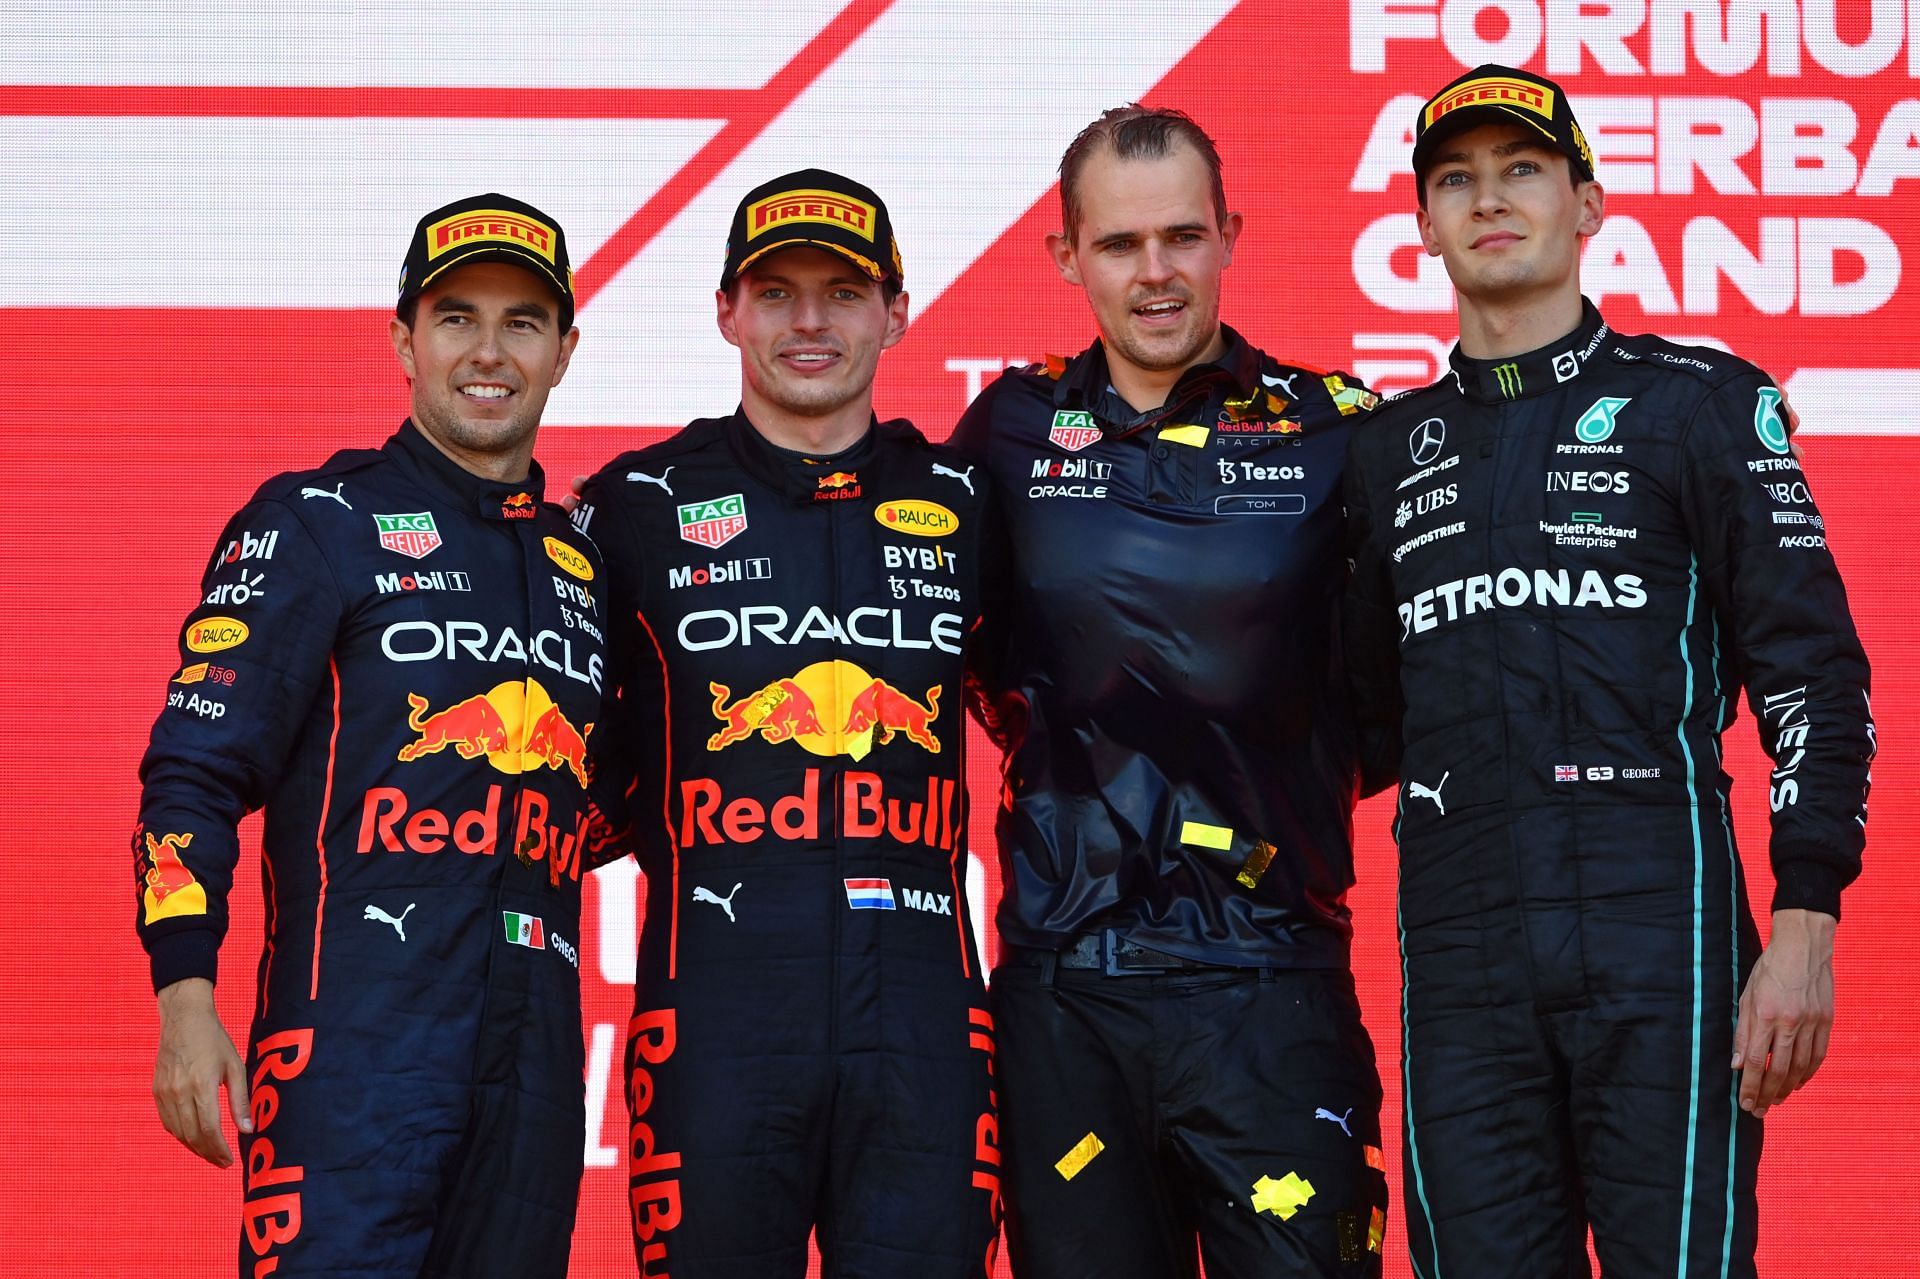 Max Verstappen has gained a giant lead in the championship by winning the Azerbaijan GP